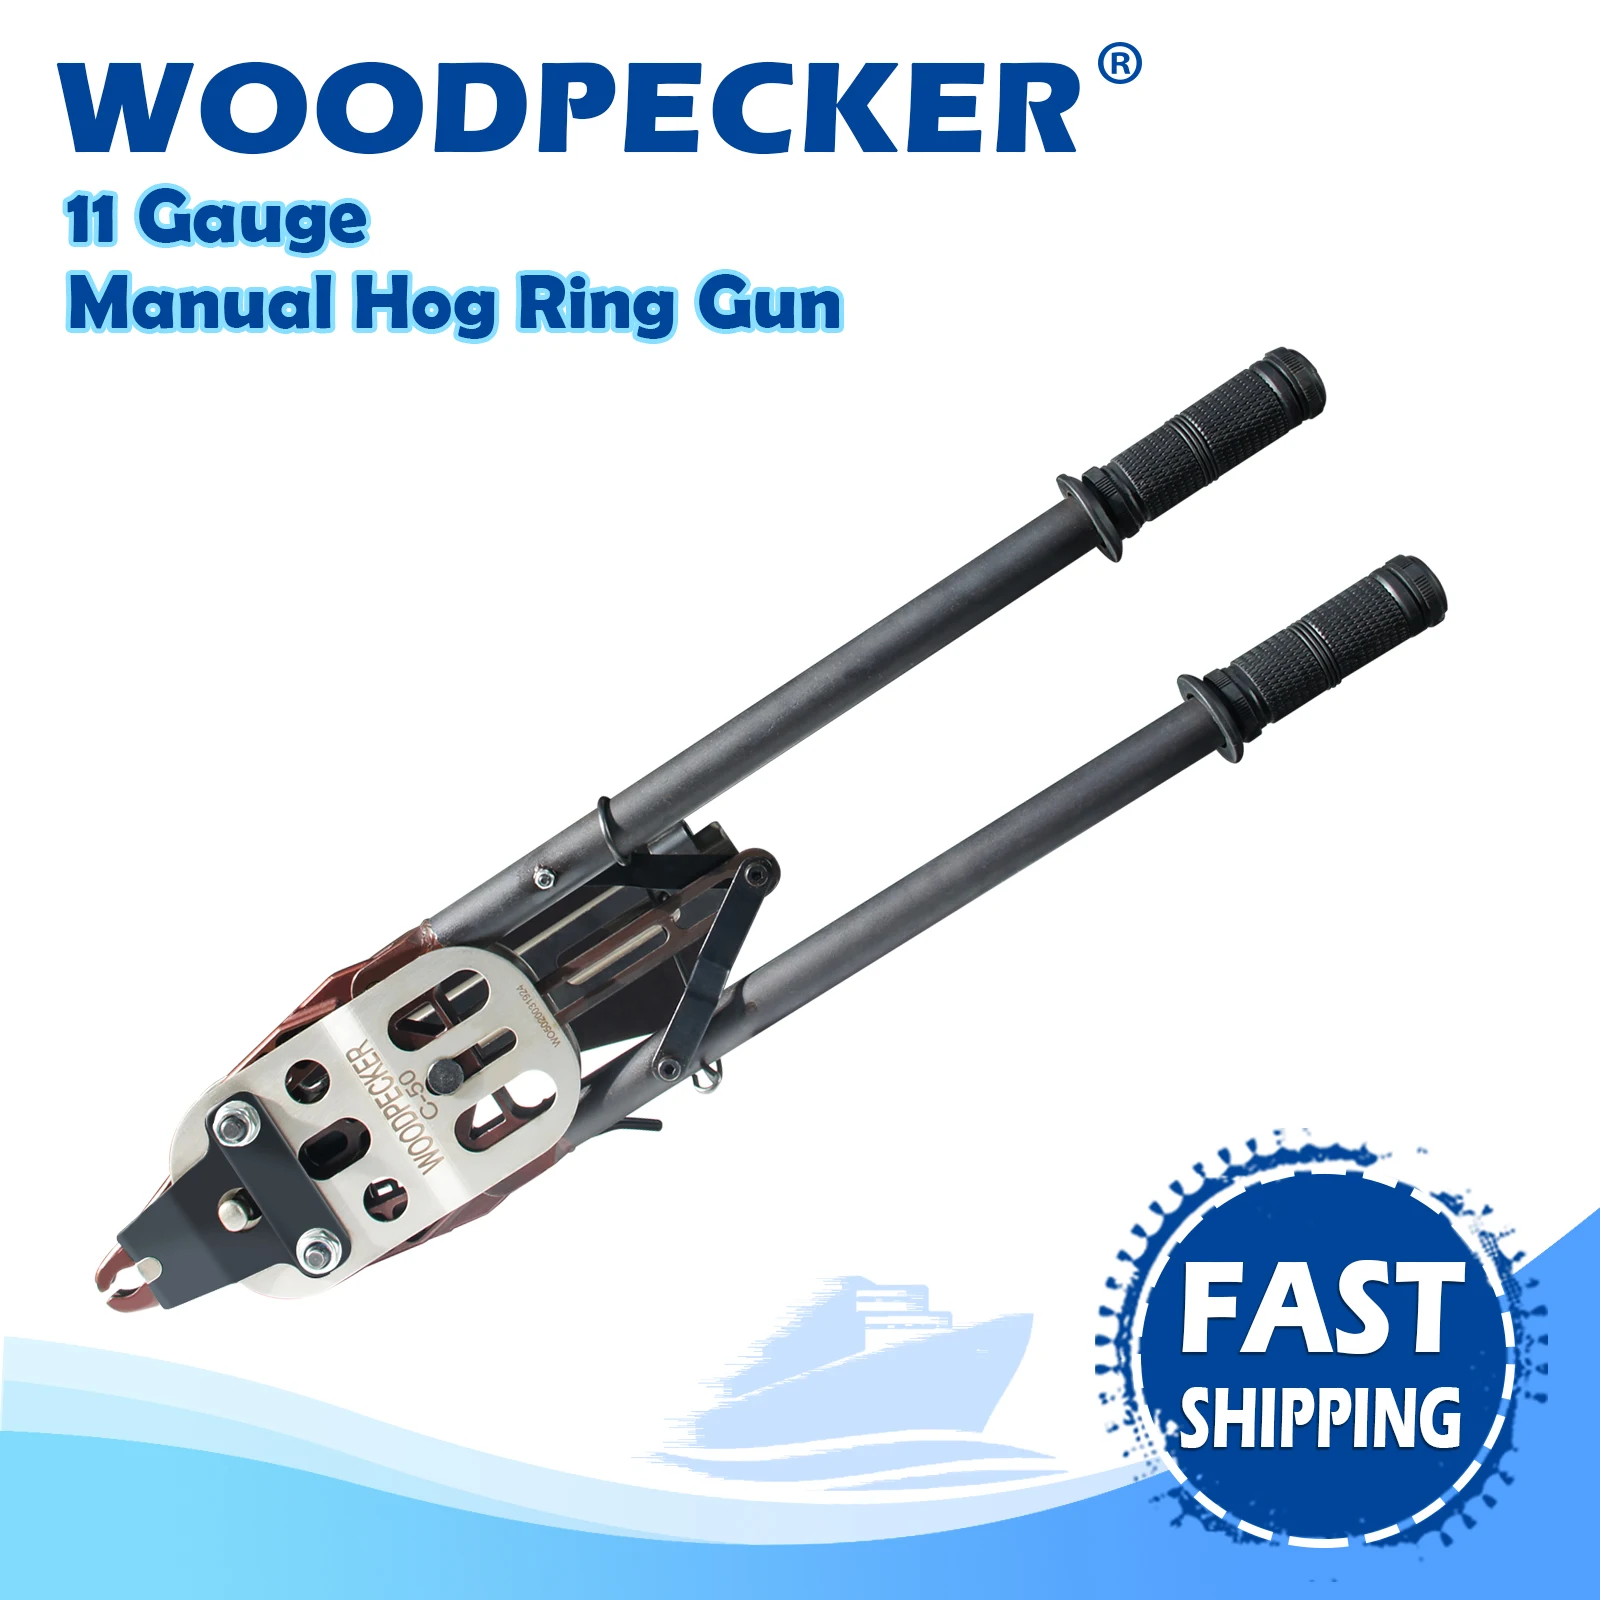 WOODPECKER C50 11 Gauge Heavy-Duty Manual Hog Ring Gun, Snap-Ring Plier with Auto-feed System, 45mm Crown for Wire Cages,Fencing